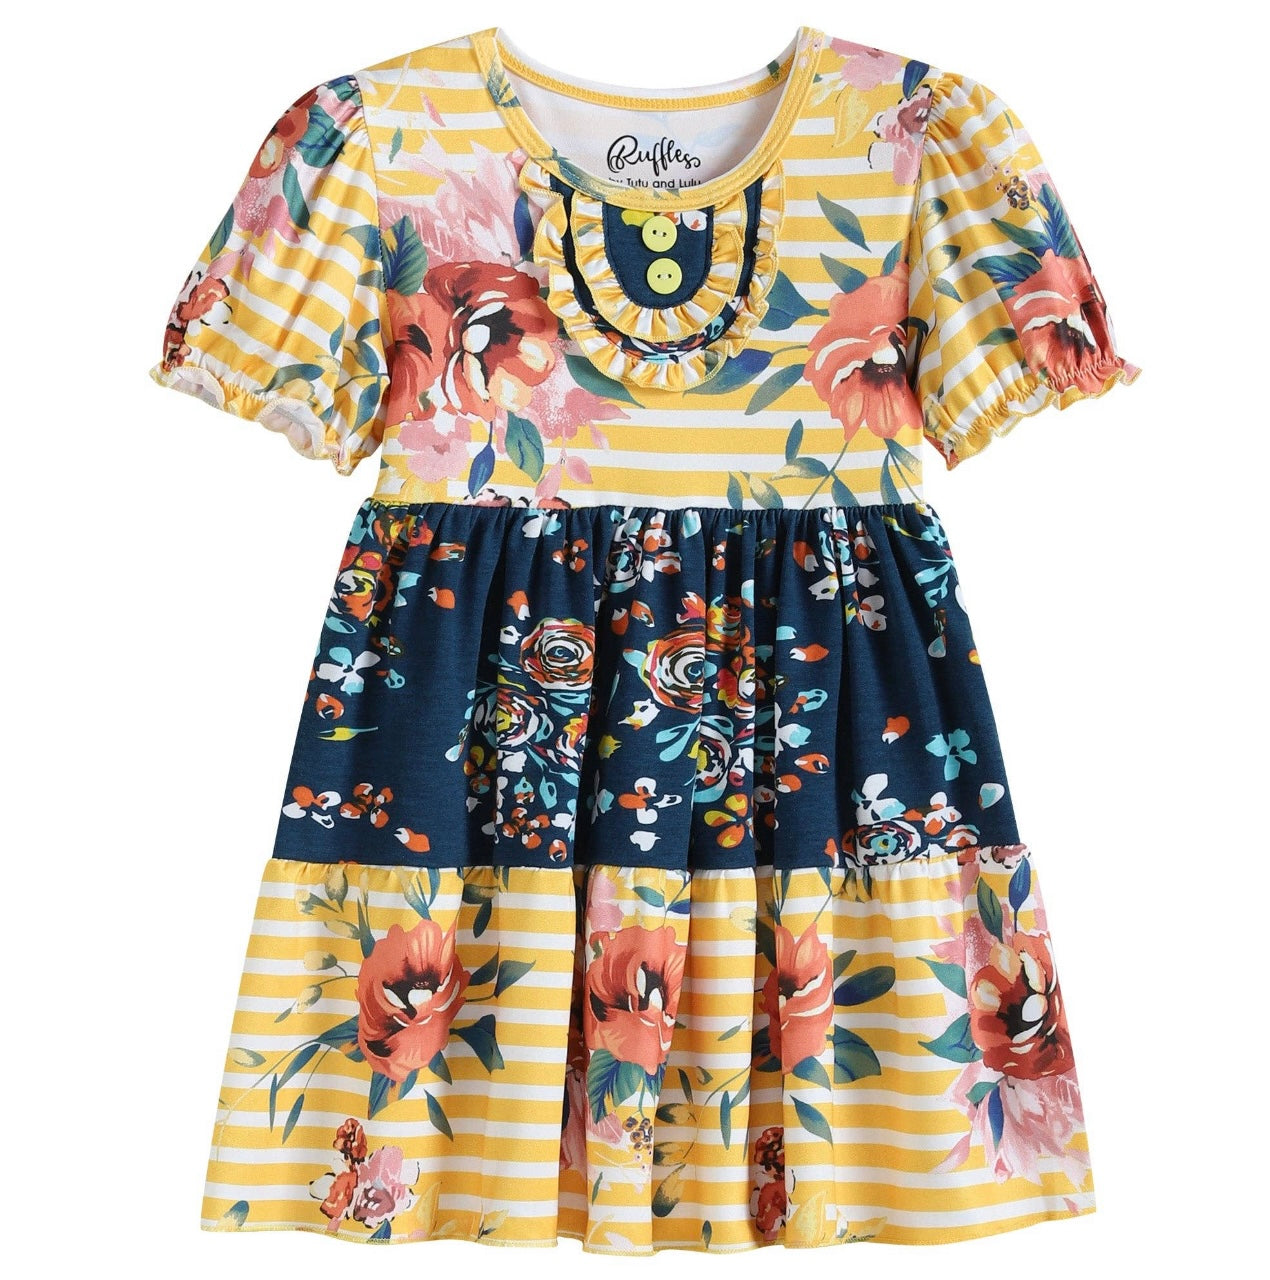 Ochre and Floral Ruffle Dress